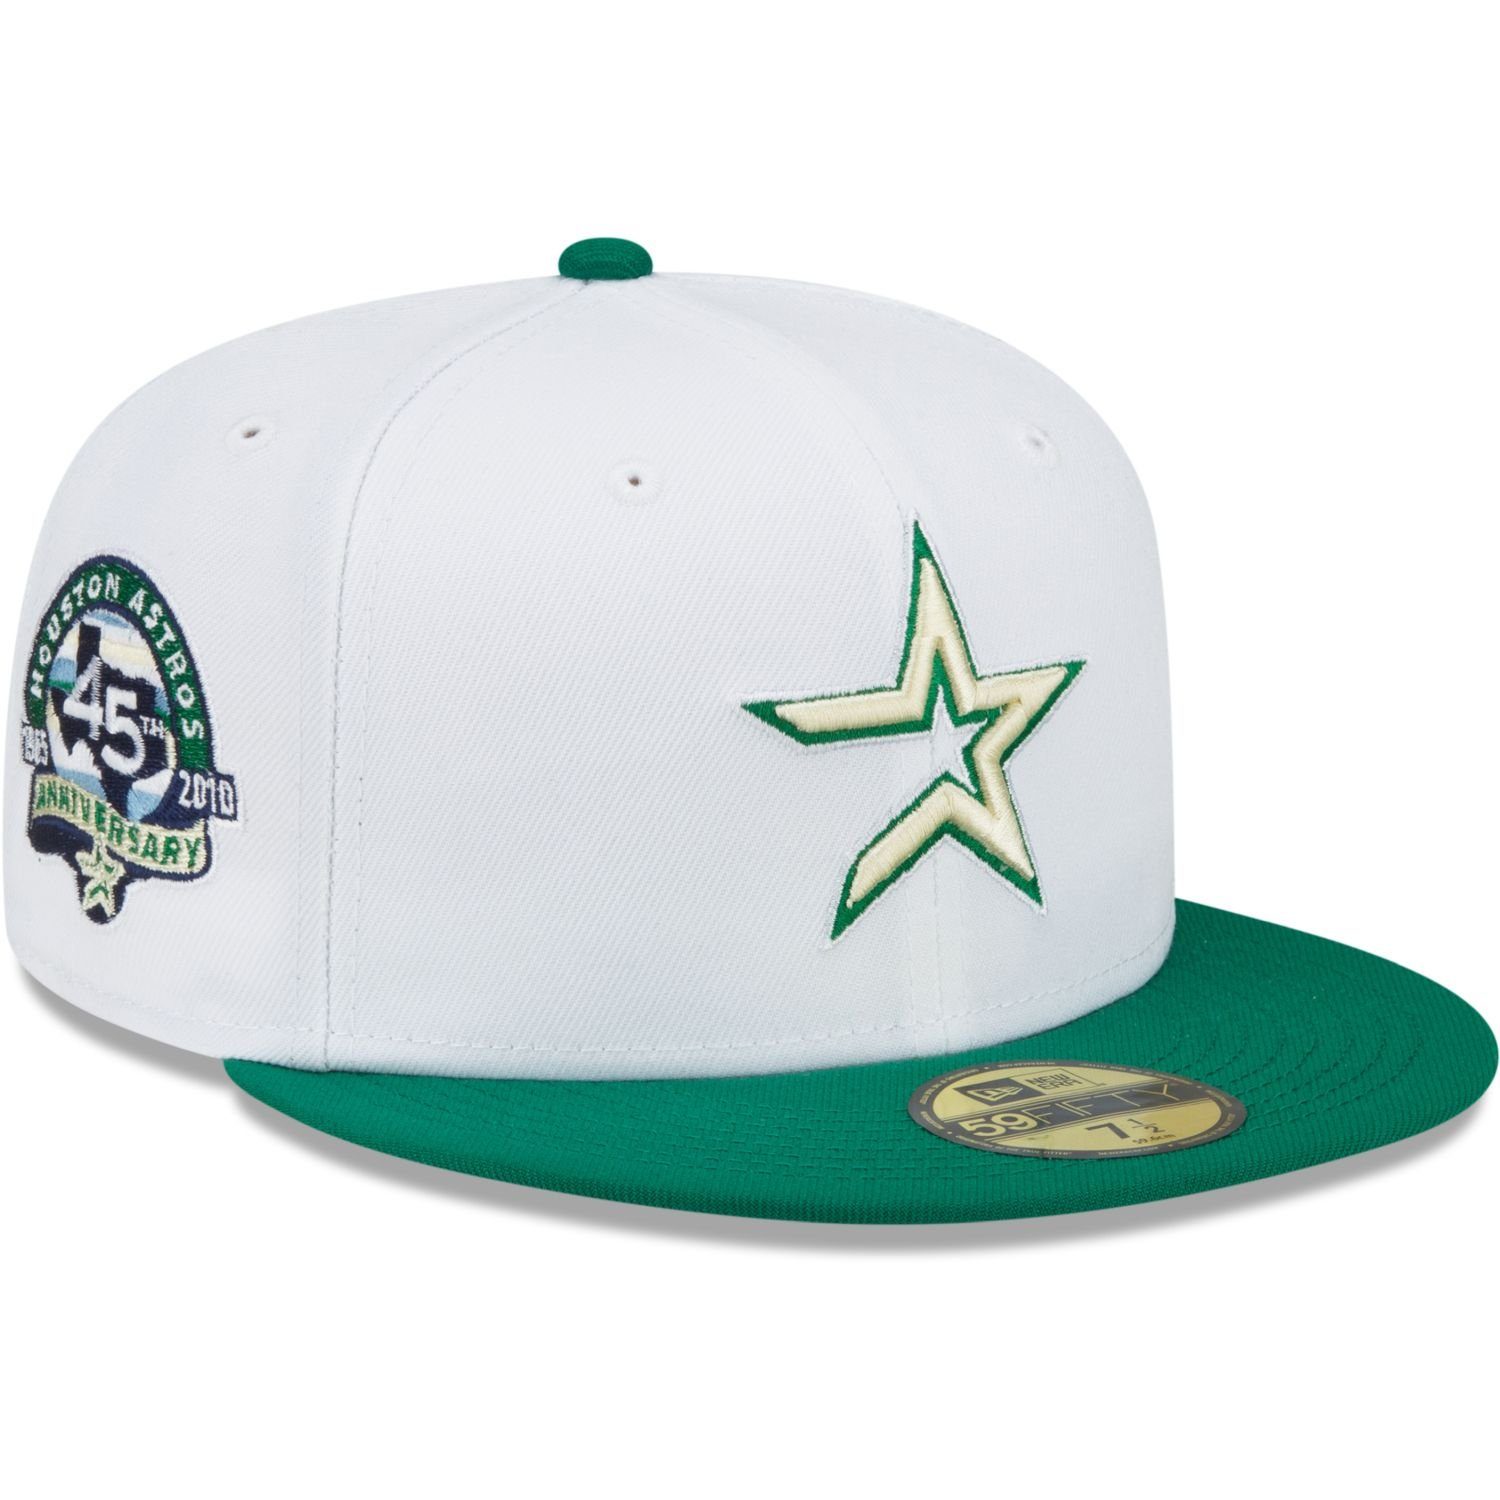 Era Astros Houston Fitted ANNIVERSARY New Cap 59Fifty